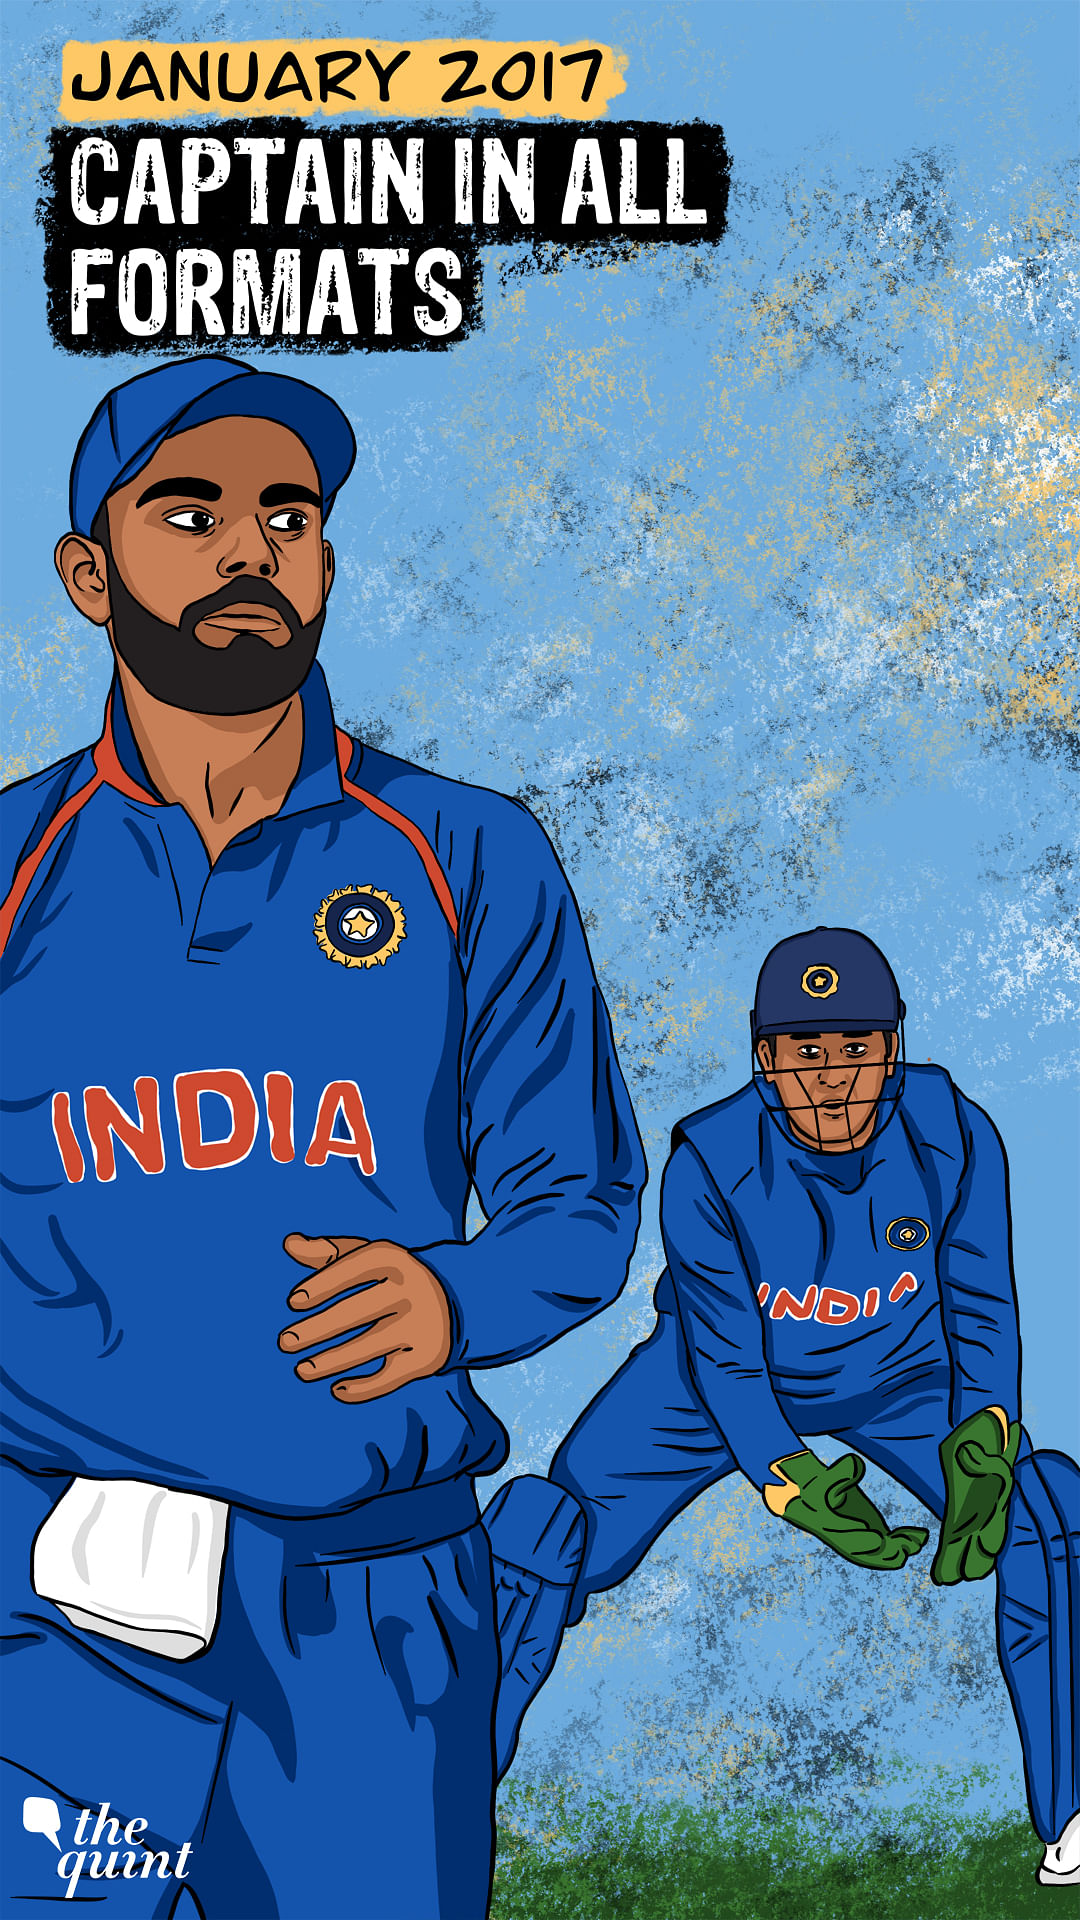 From an 18-year-old boy to becoming India’s most successful Test captain – a look at Virat Kohli’s journey so far.